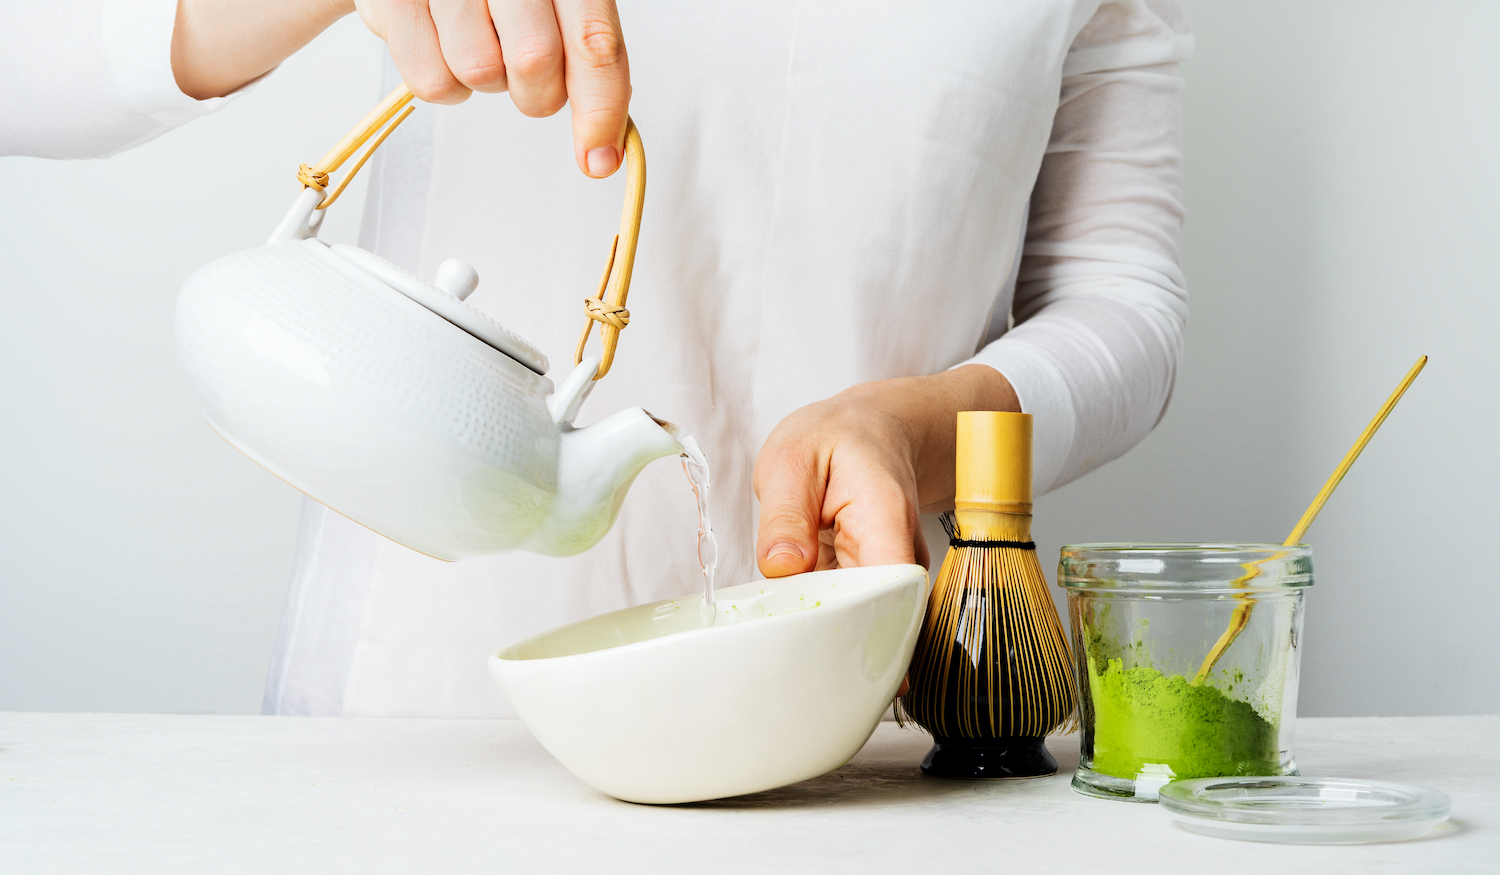 A woman in white pours water from a teapot to make organic Japanese green tea Matcha. Background with tools Chasen bamboo whisk, Chashaku spoon, and bowl for brewing.